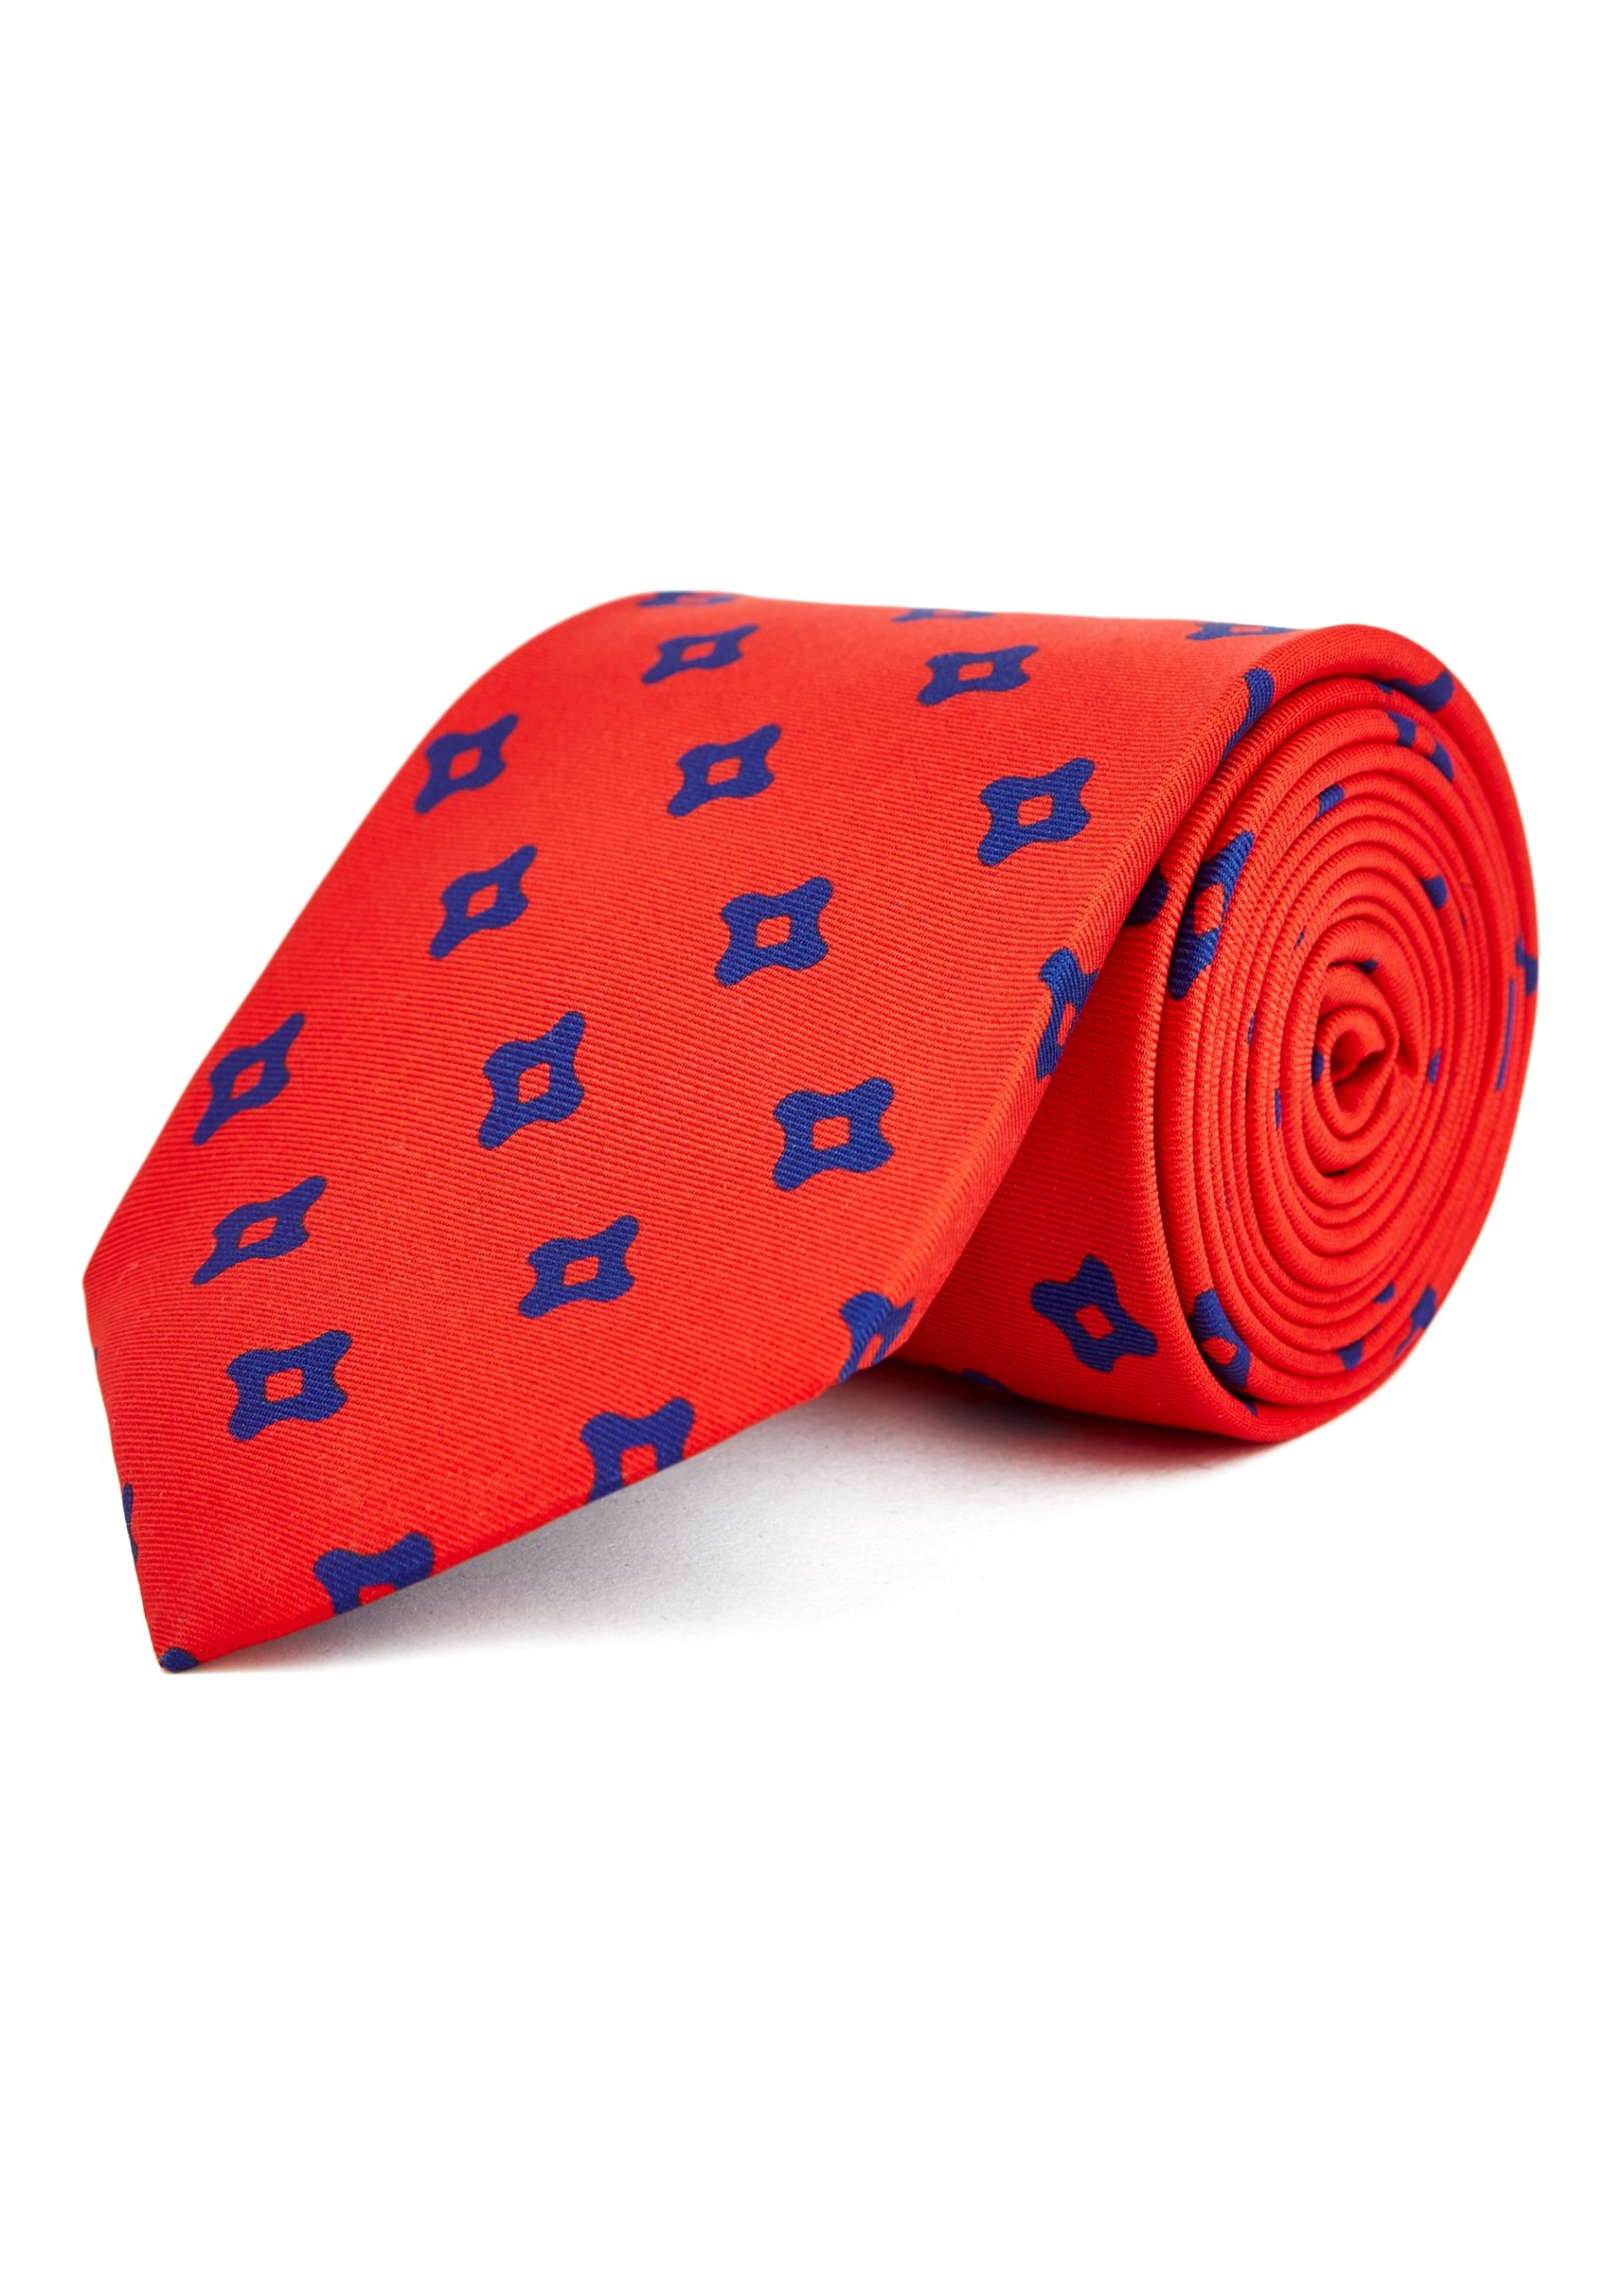 Silk tie in red with square pattern